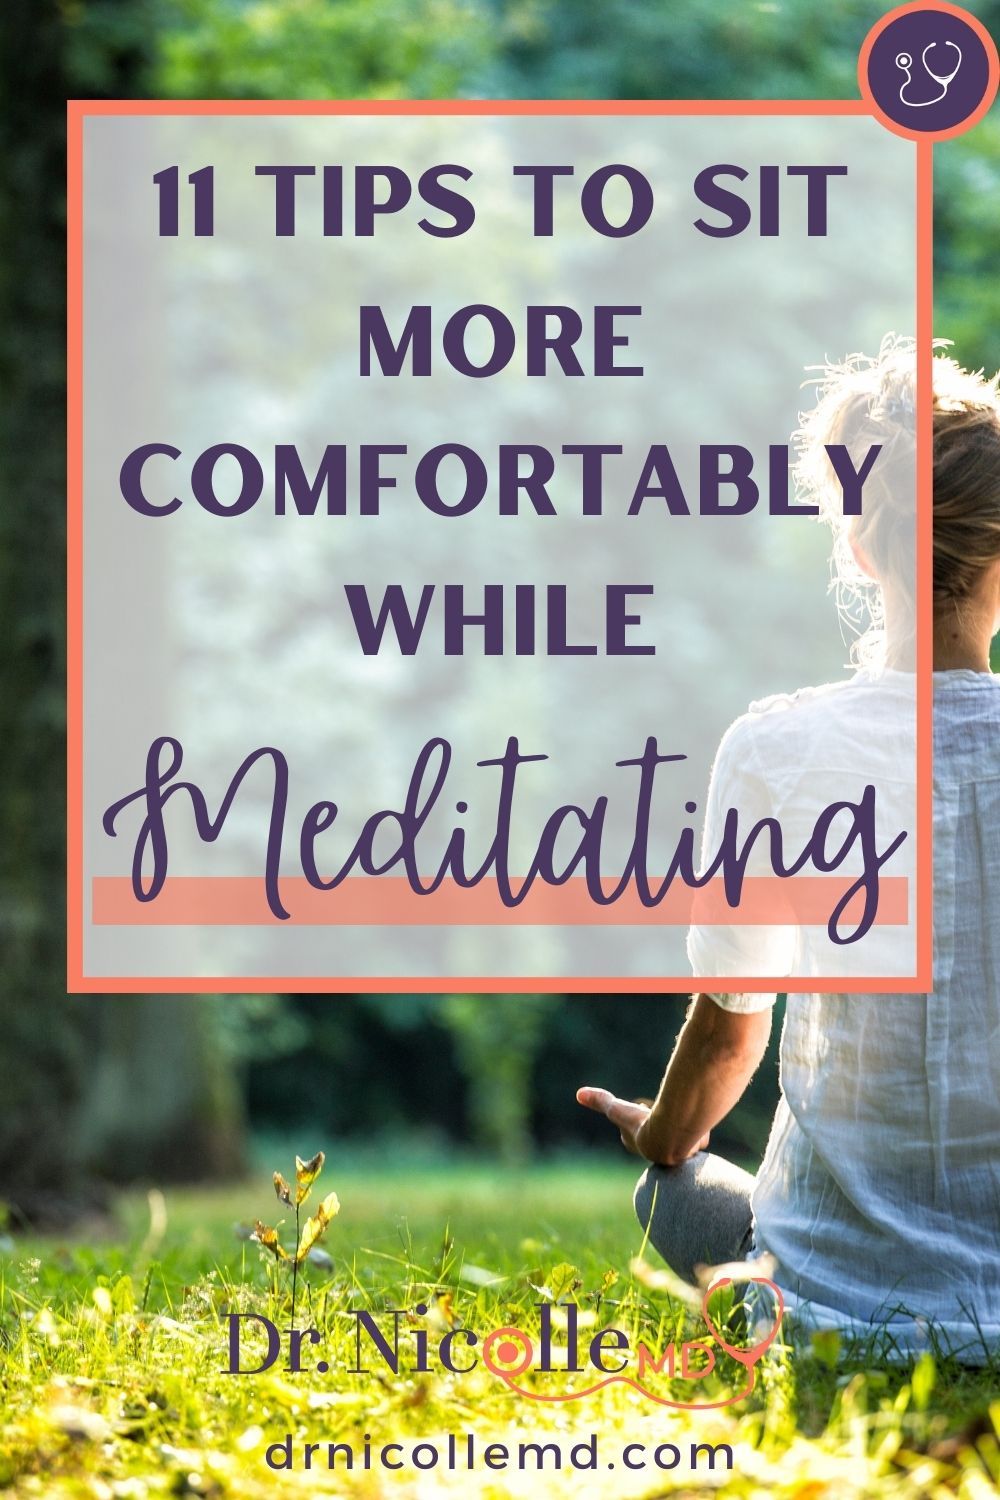 11 Tips To Sit More Comfortably While Meditating